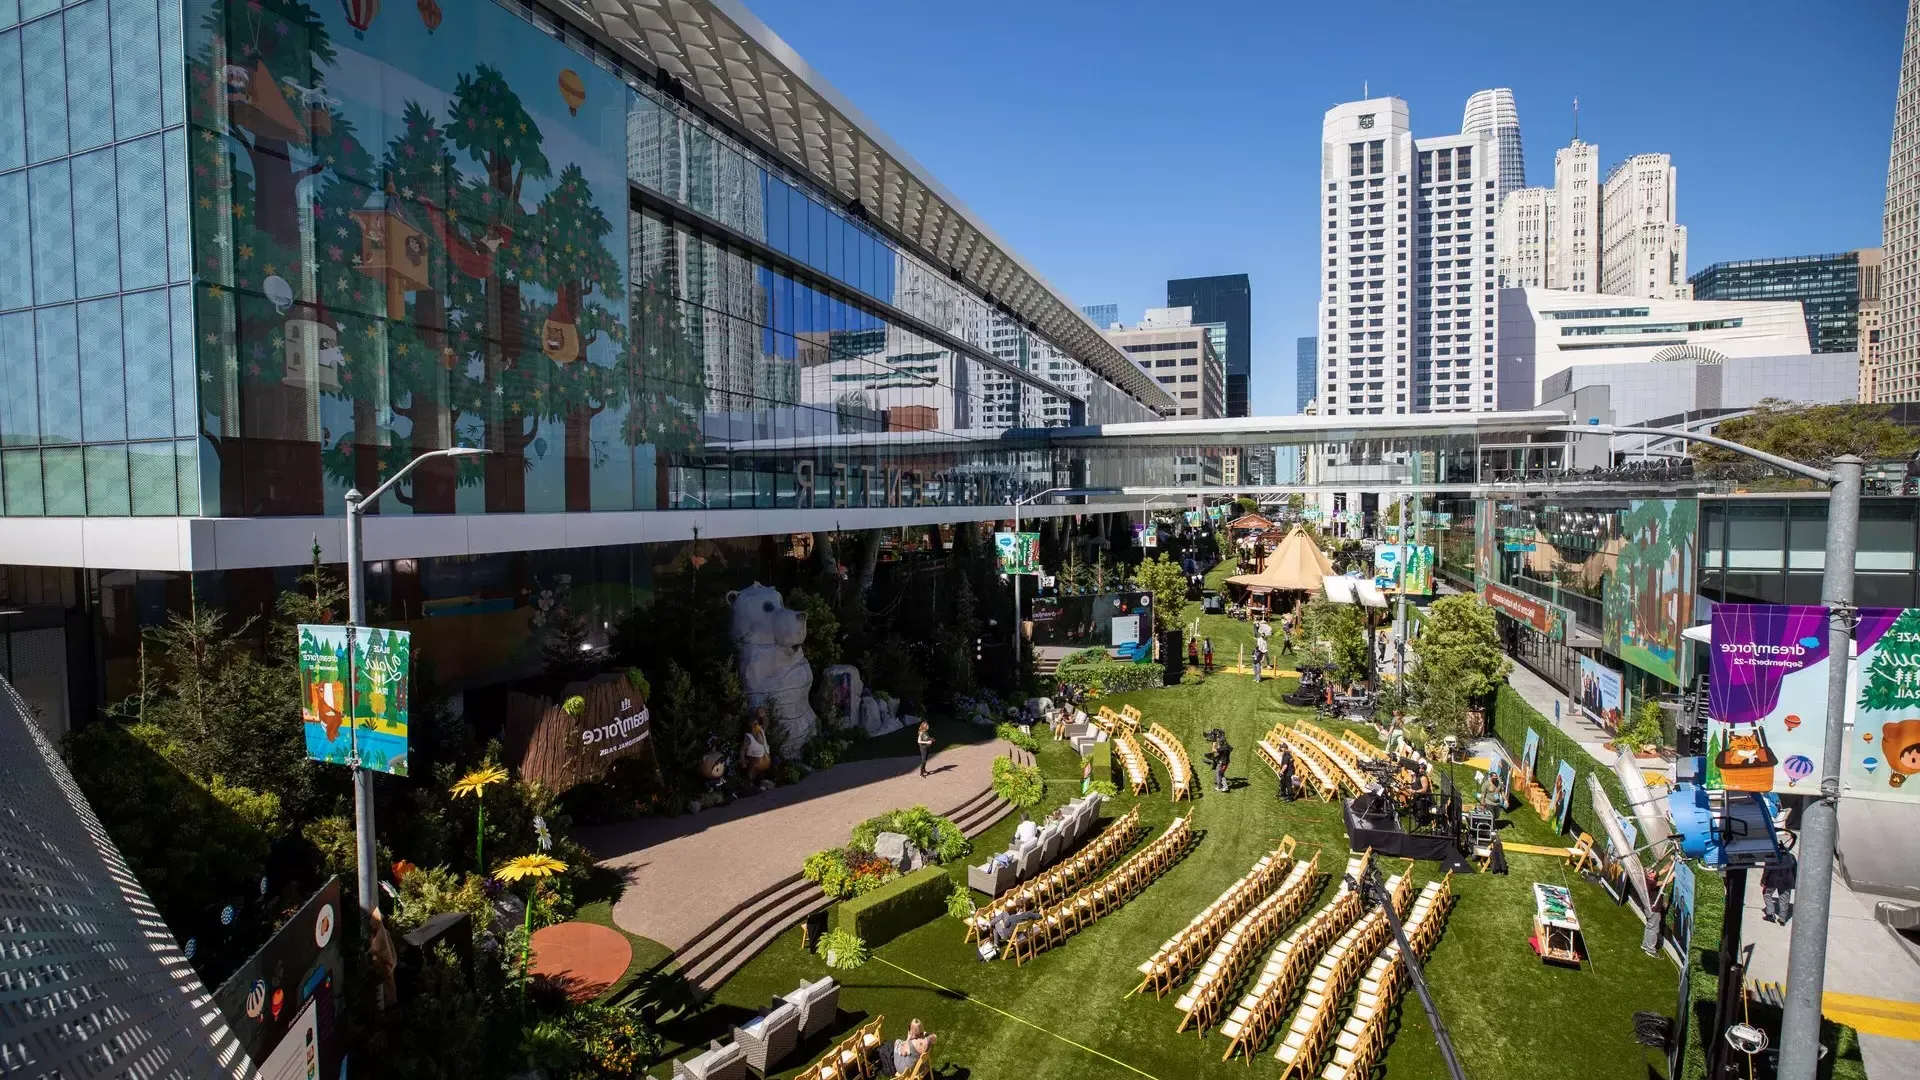 Dreamforce Park at the Moscone Center